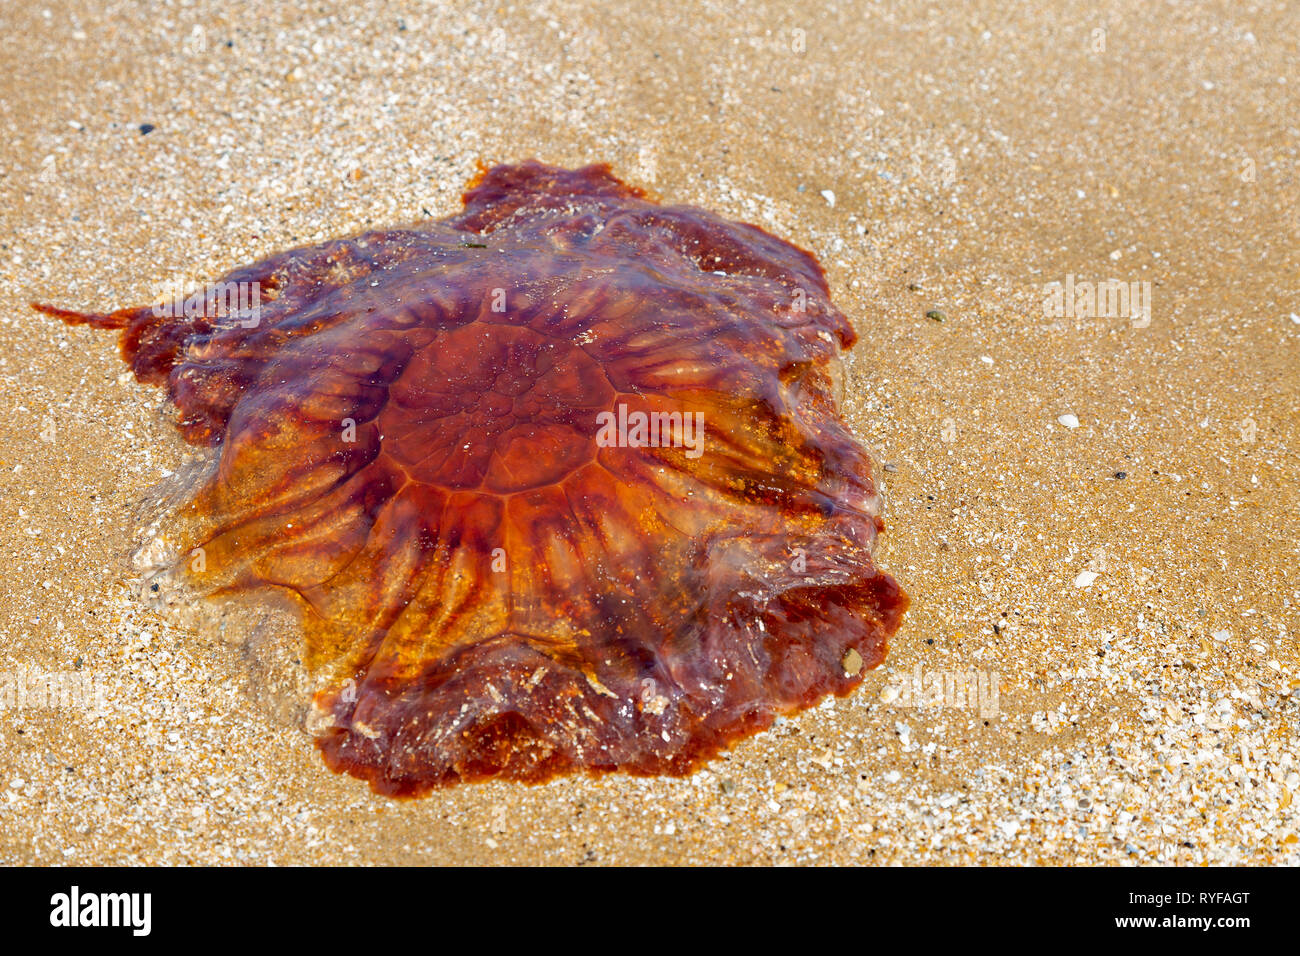 Lions mane jellyfish stranded on a beach in North Wales UK Stock Photo